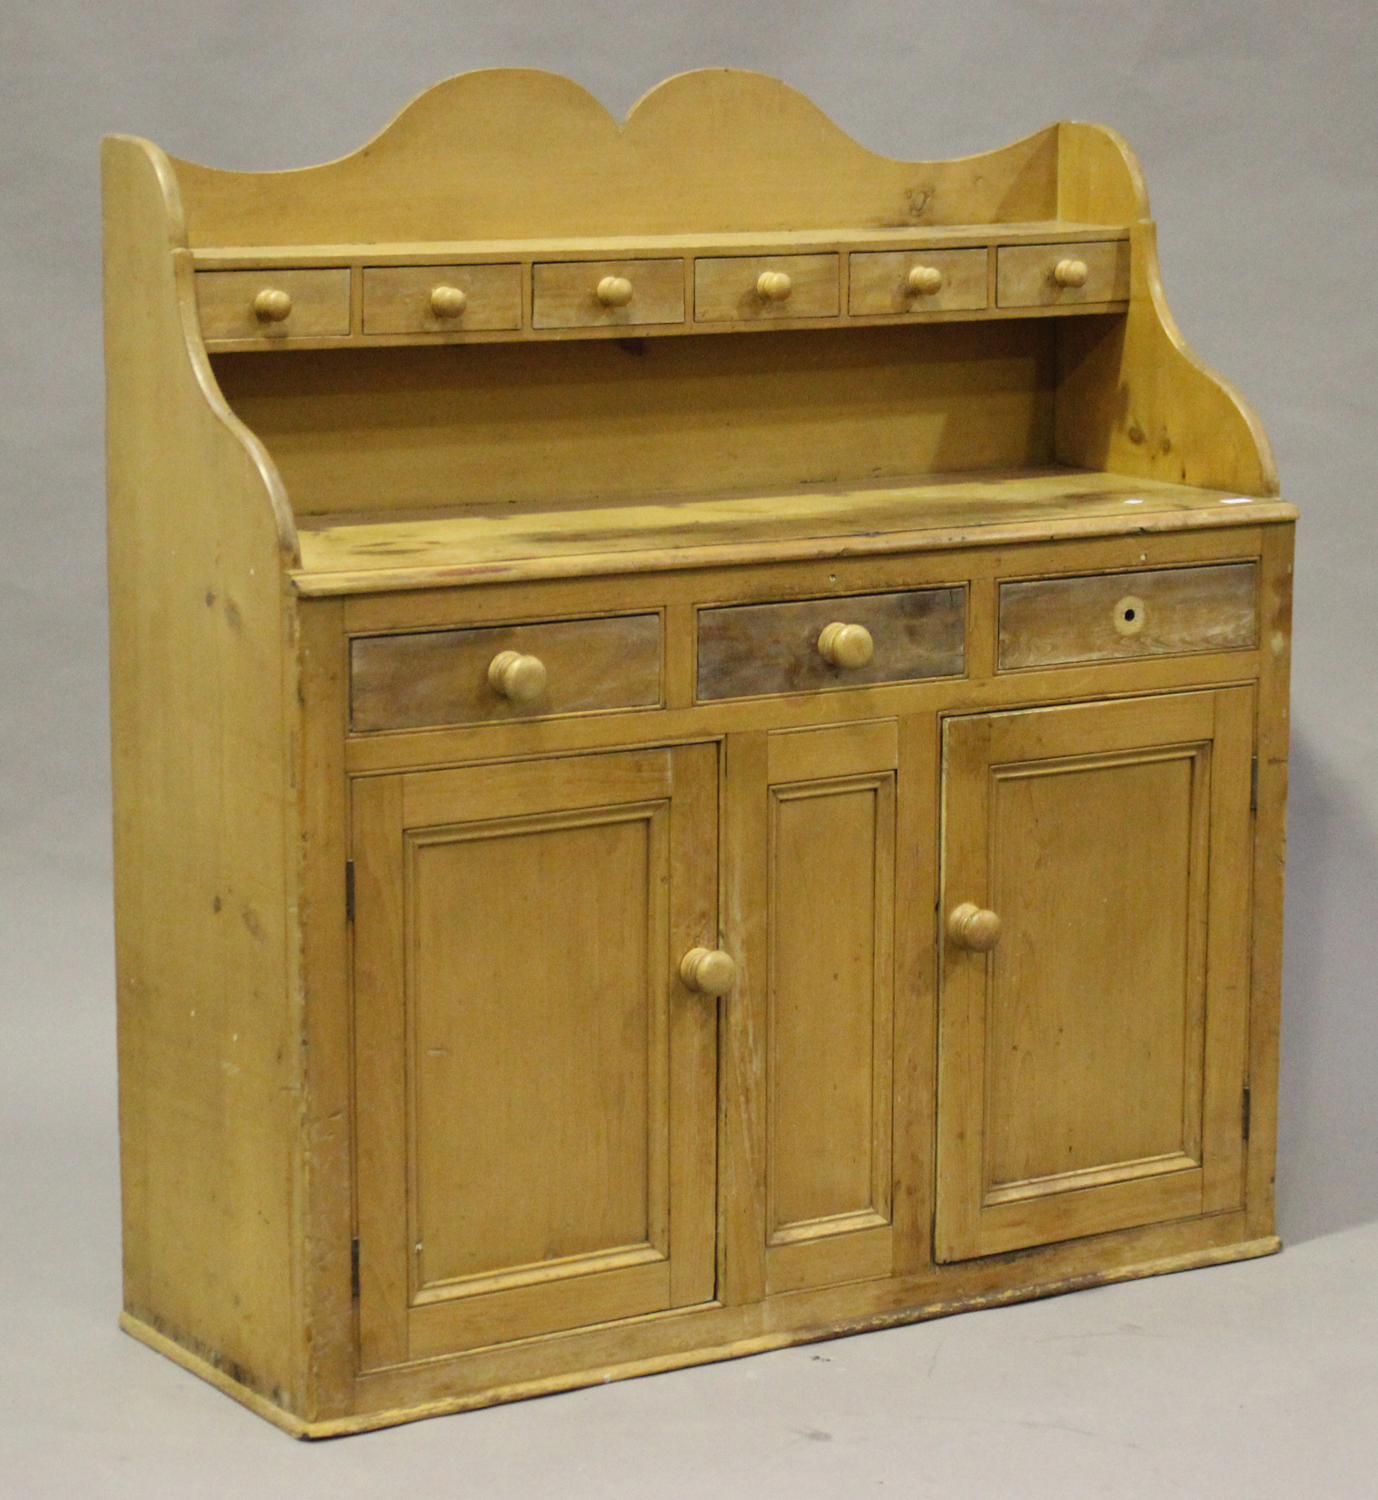 A Victorian Pine Kitchen Dresser The Gallery Back Fitted With Six